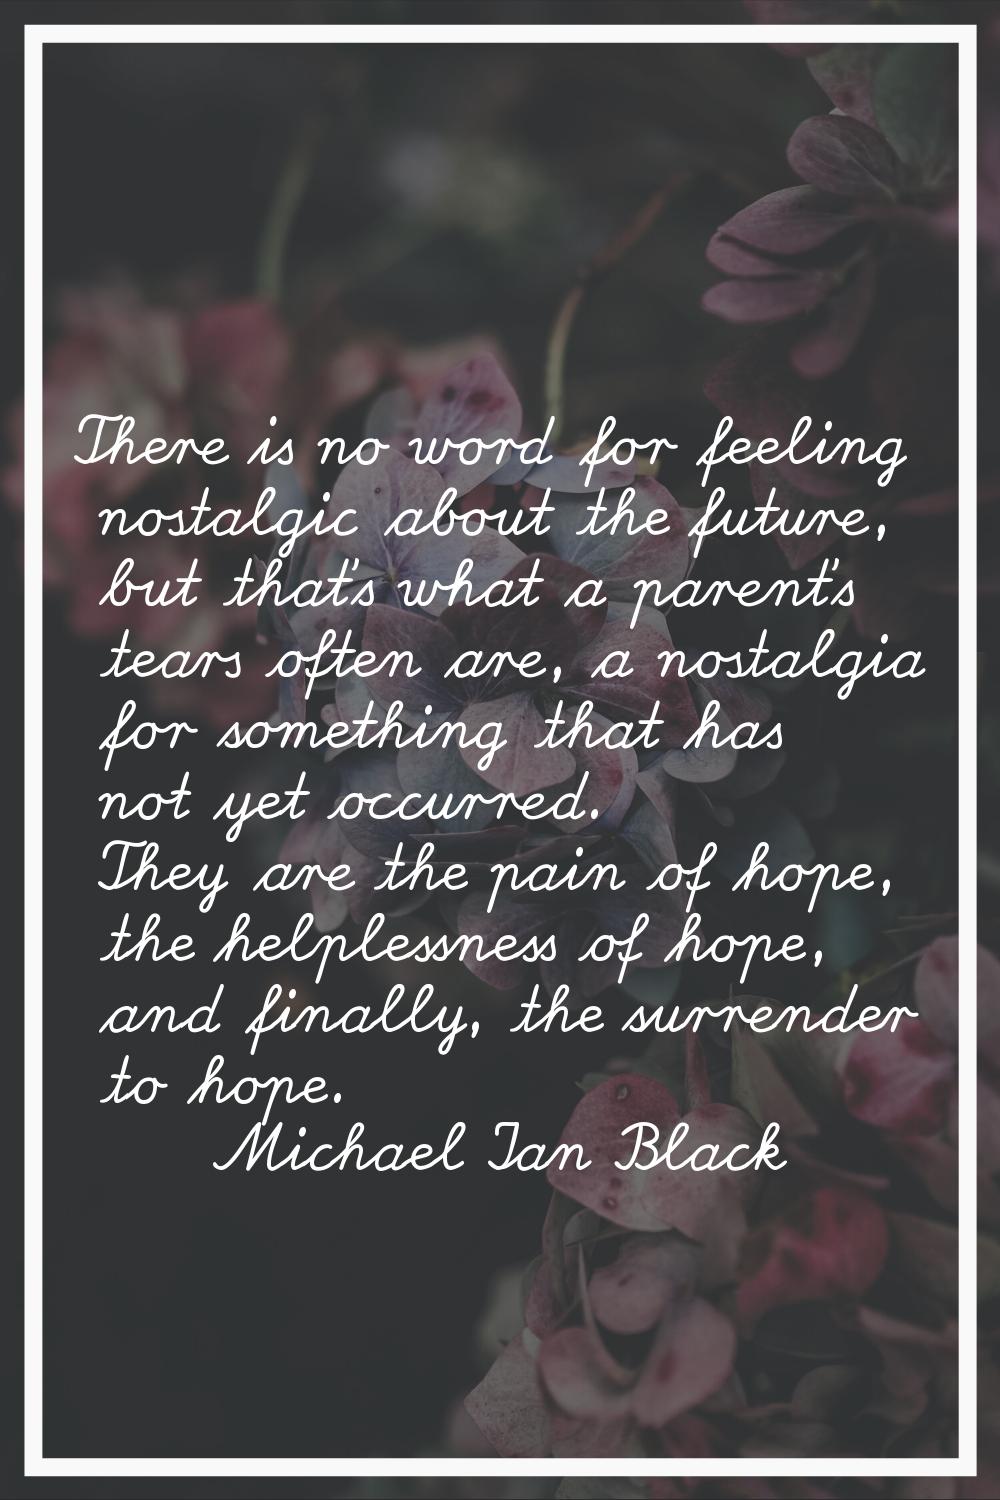 There is no word for feeling nostalgic about the future, but that's what a parent's tears often are